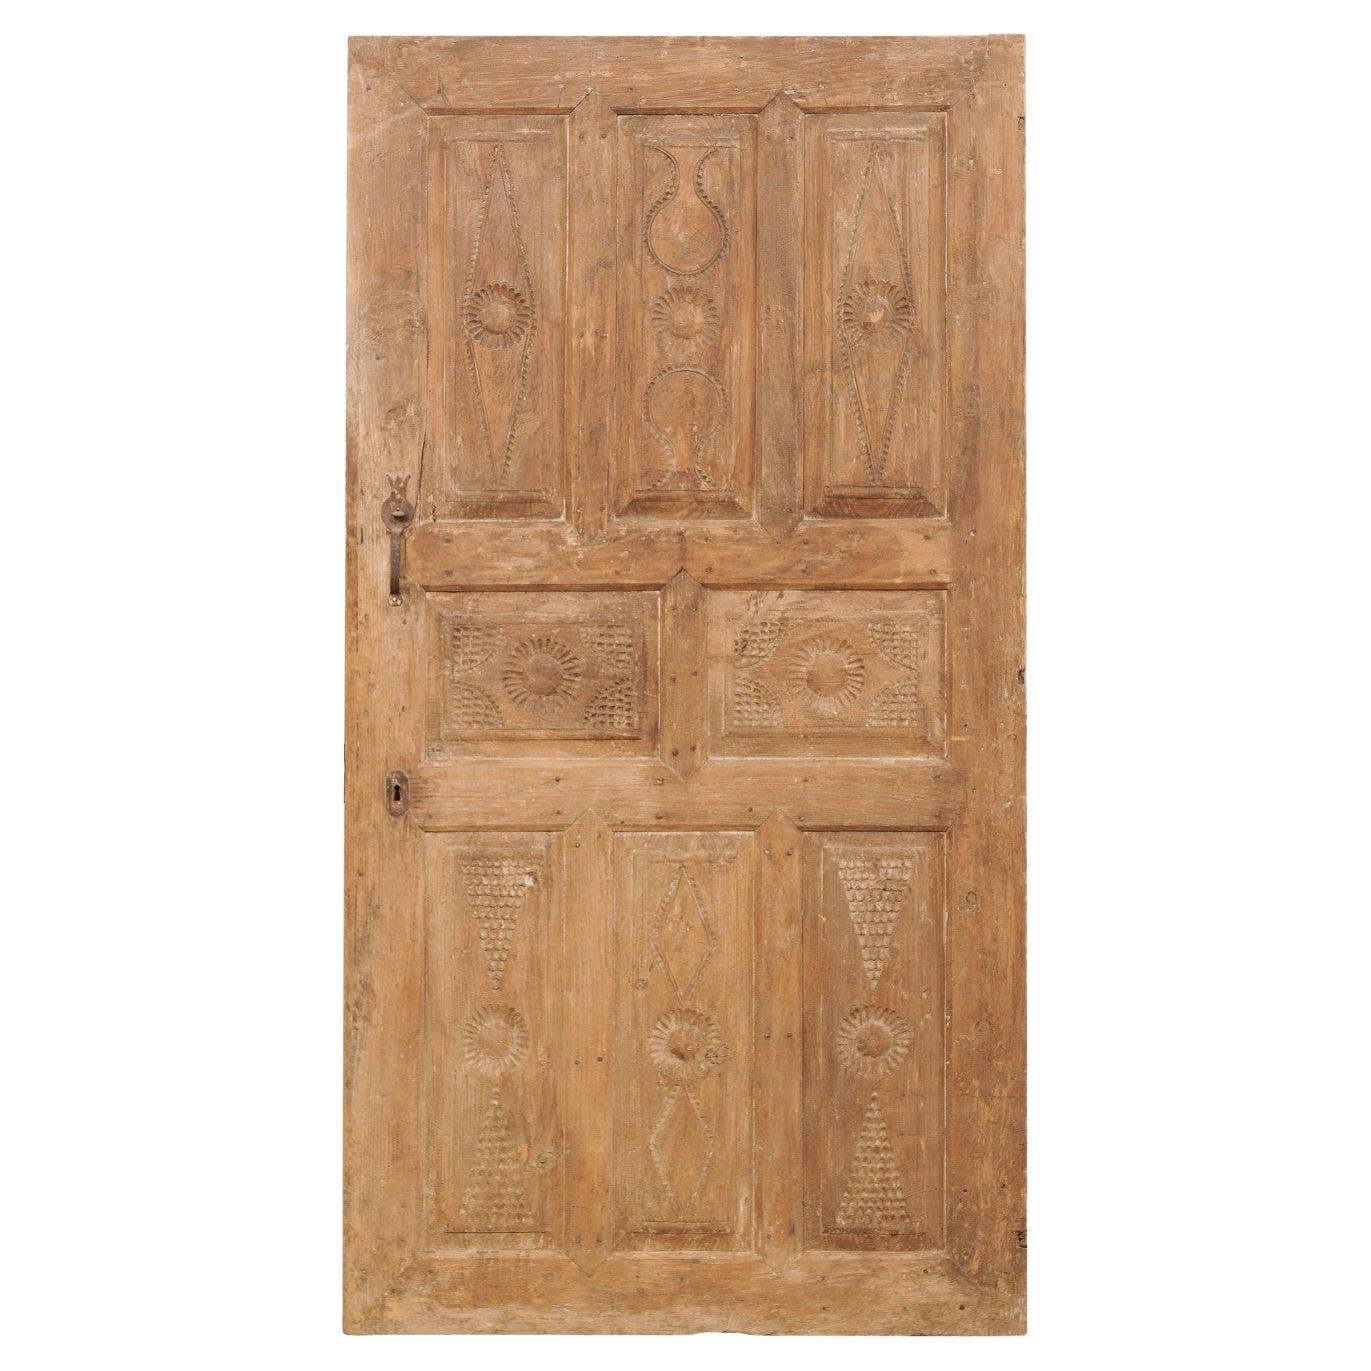 19th C. Turkish Decoratively-Carved Wood Raised Panel Dooor For Sale